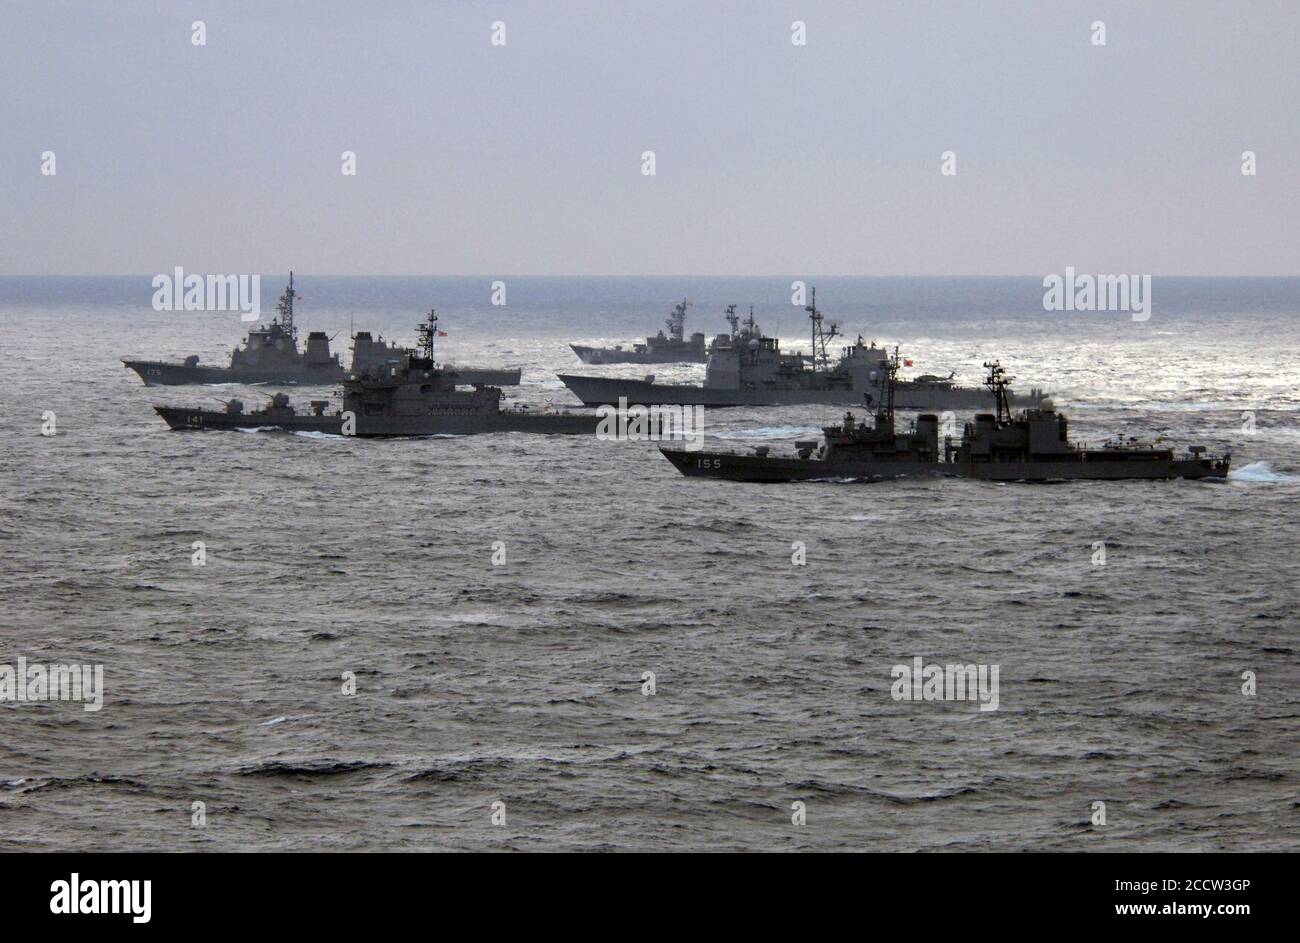 Japanese Maritime Self Defense Force (JMSDF) ships sail with an U.S. Navy ship in formation during a photo exercise in the Philippine Sea on March 18, 2007 Stock Photo